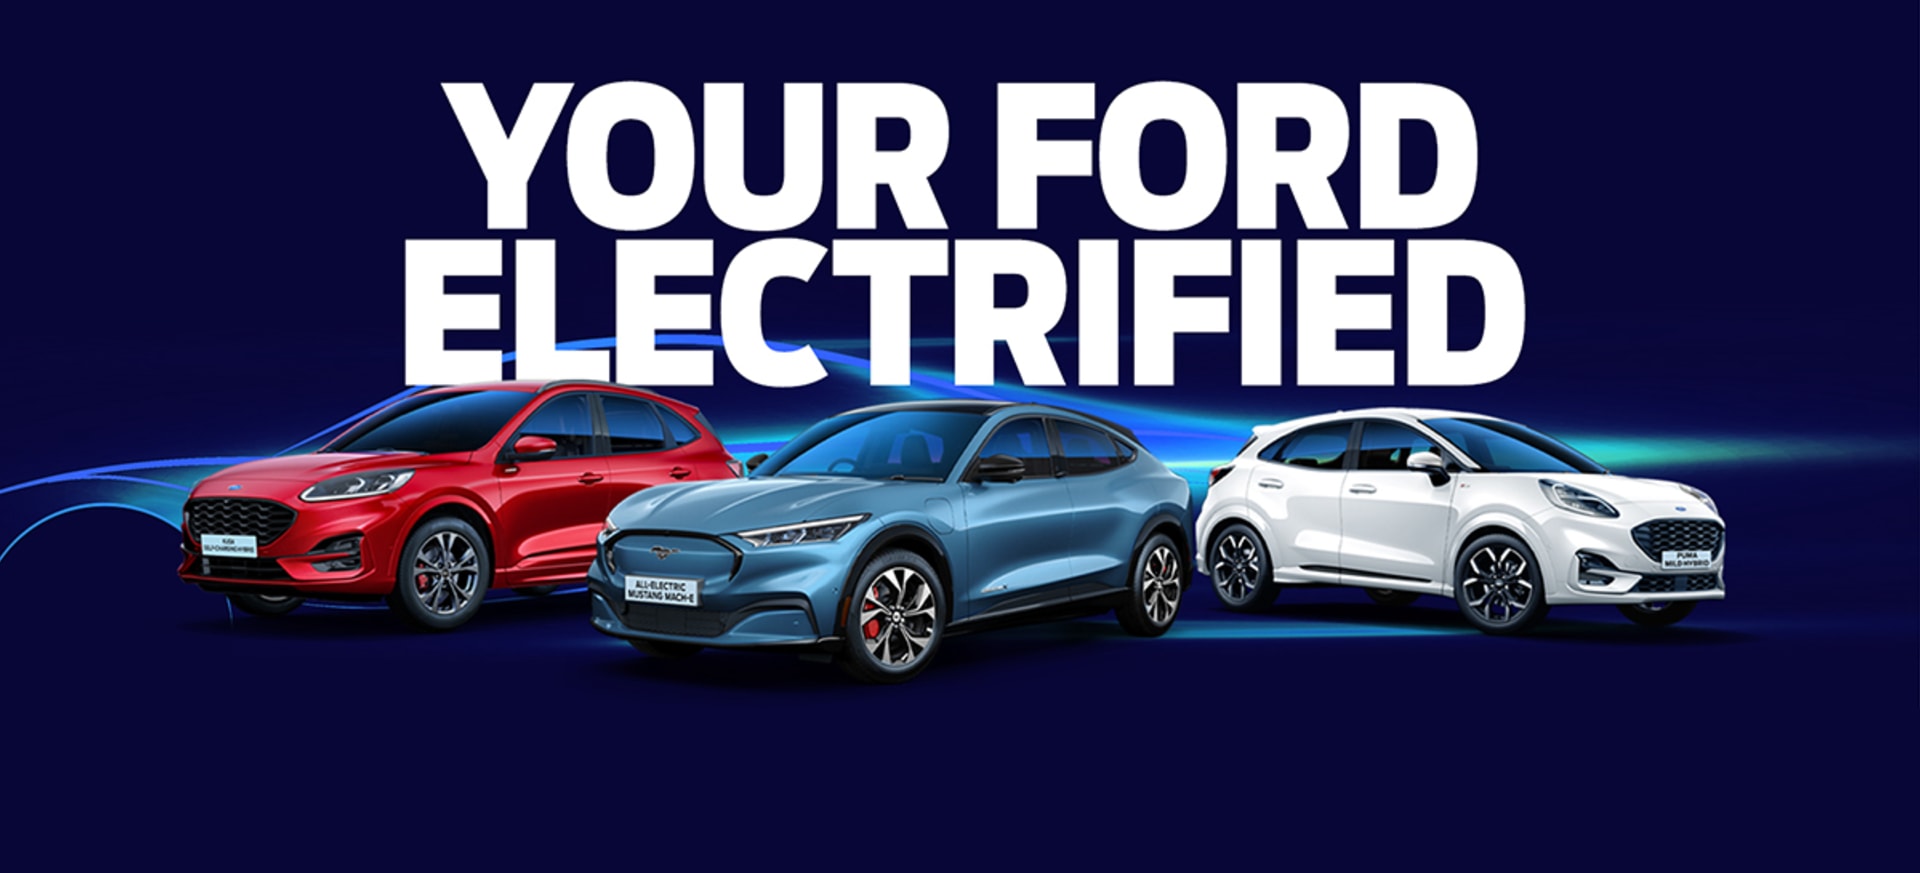 Your Ford Electrified 